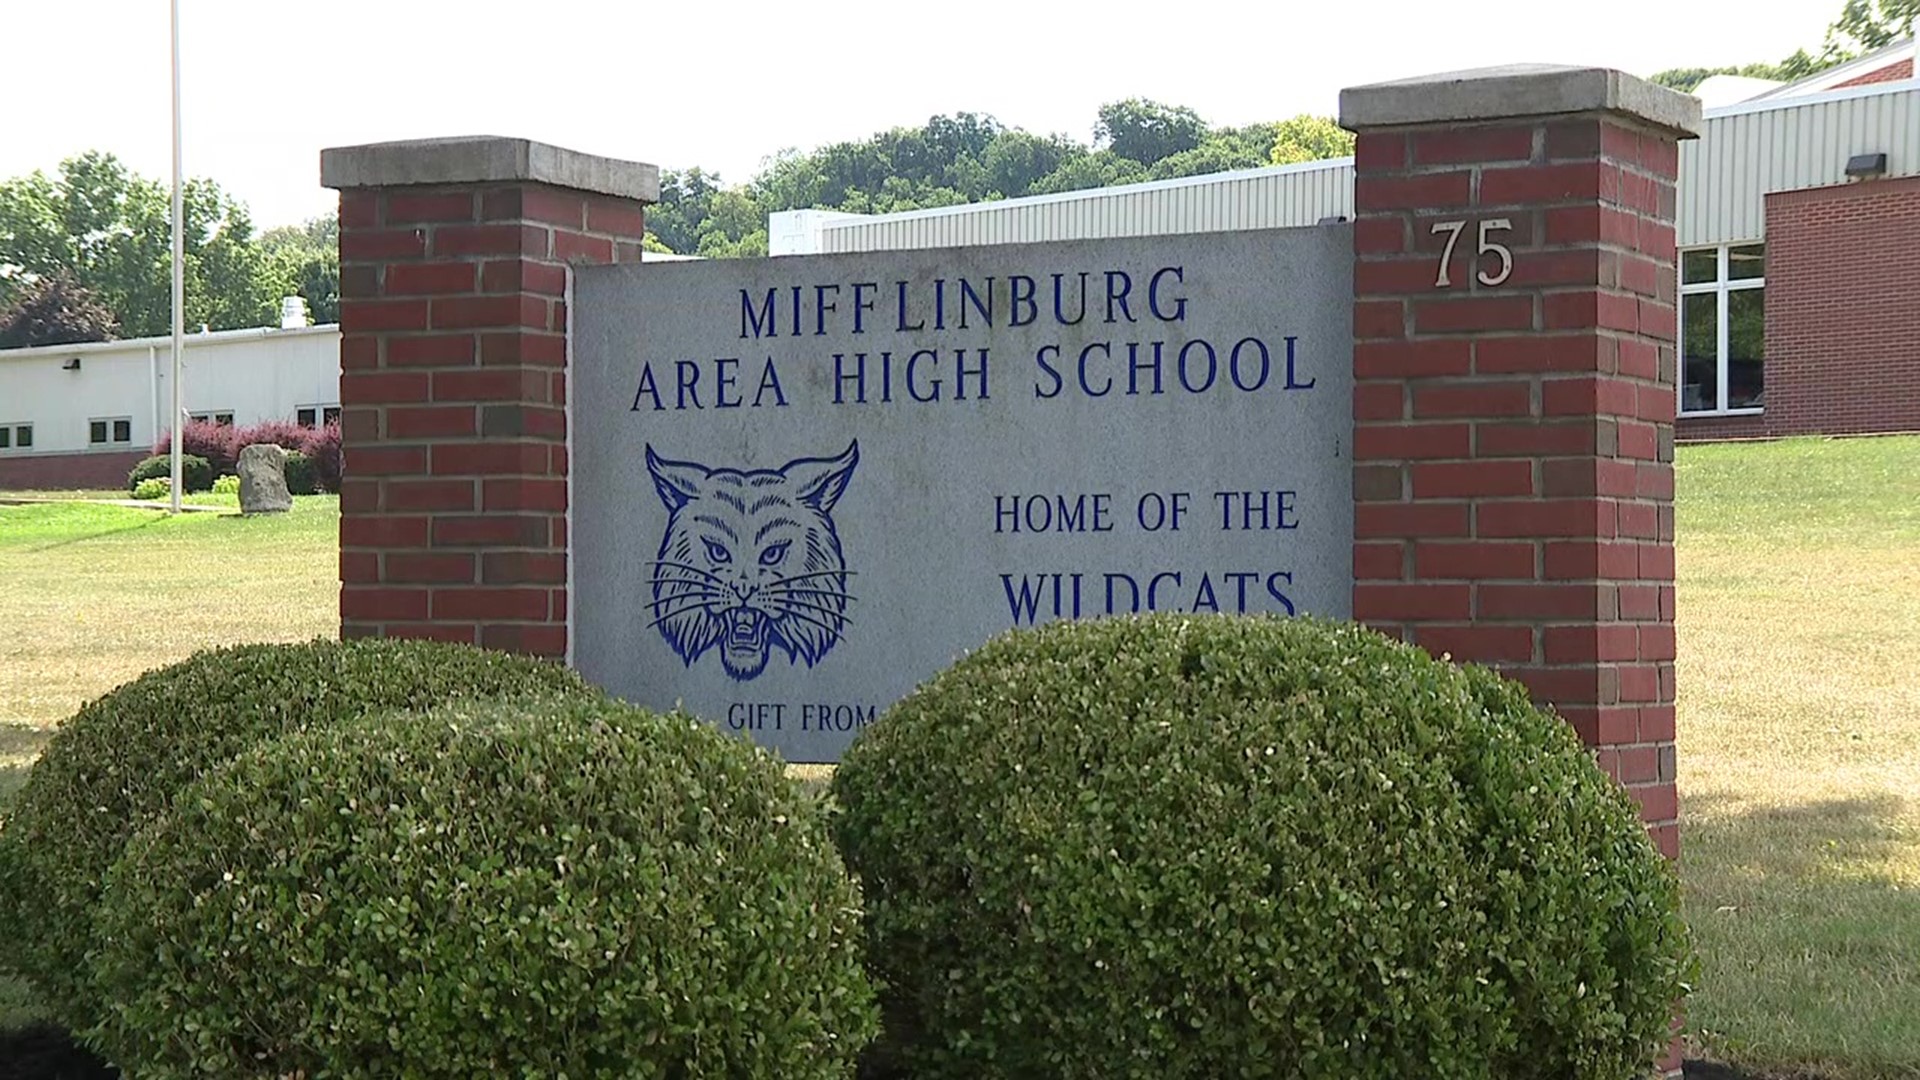 At Tuesday night's school board meeting, directors in the Mifflinburg Area School District adopted a hybrid program for students in grades 6 through 12.